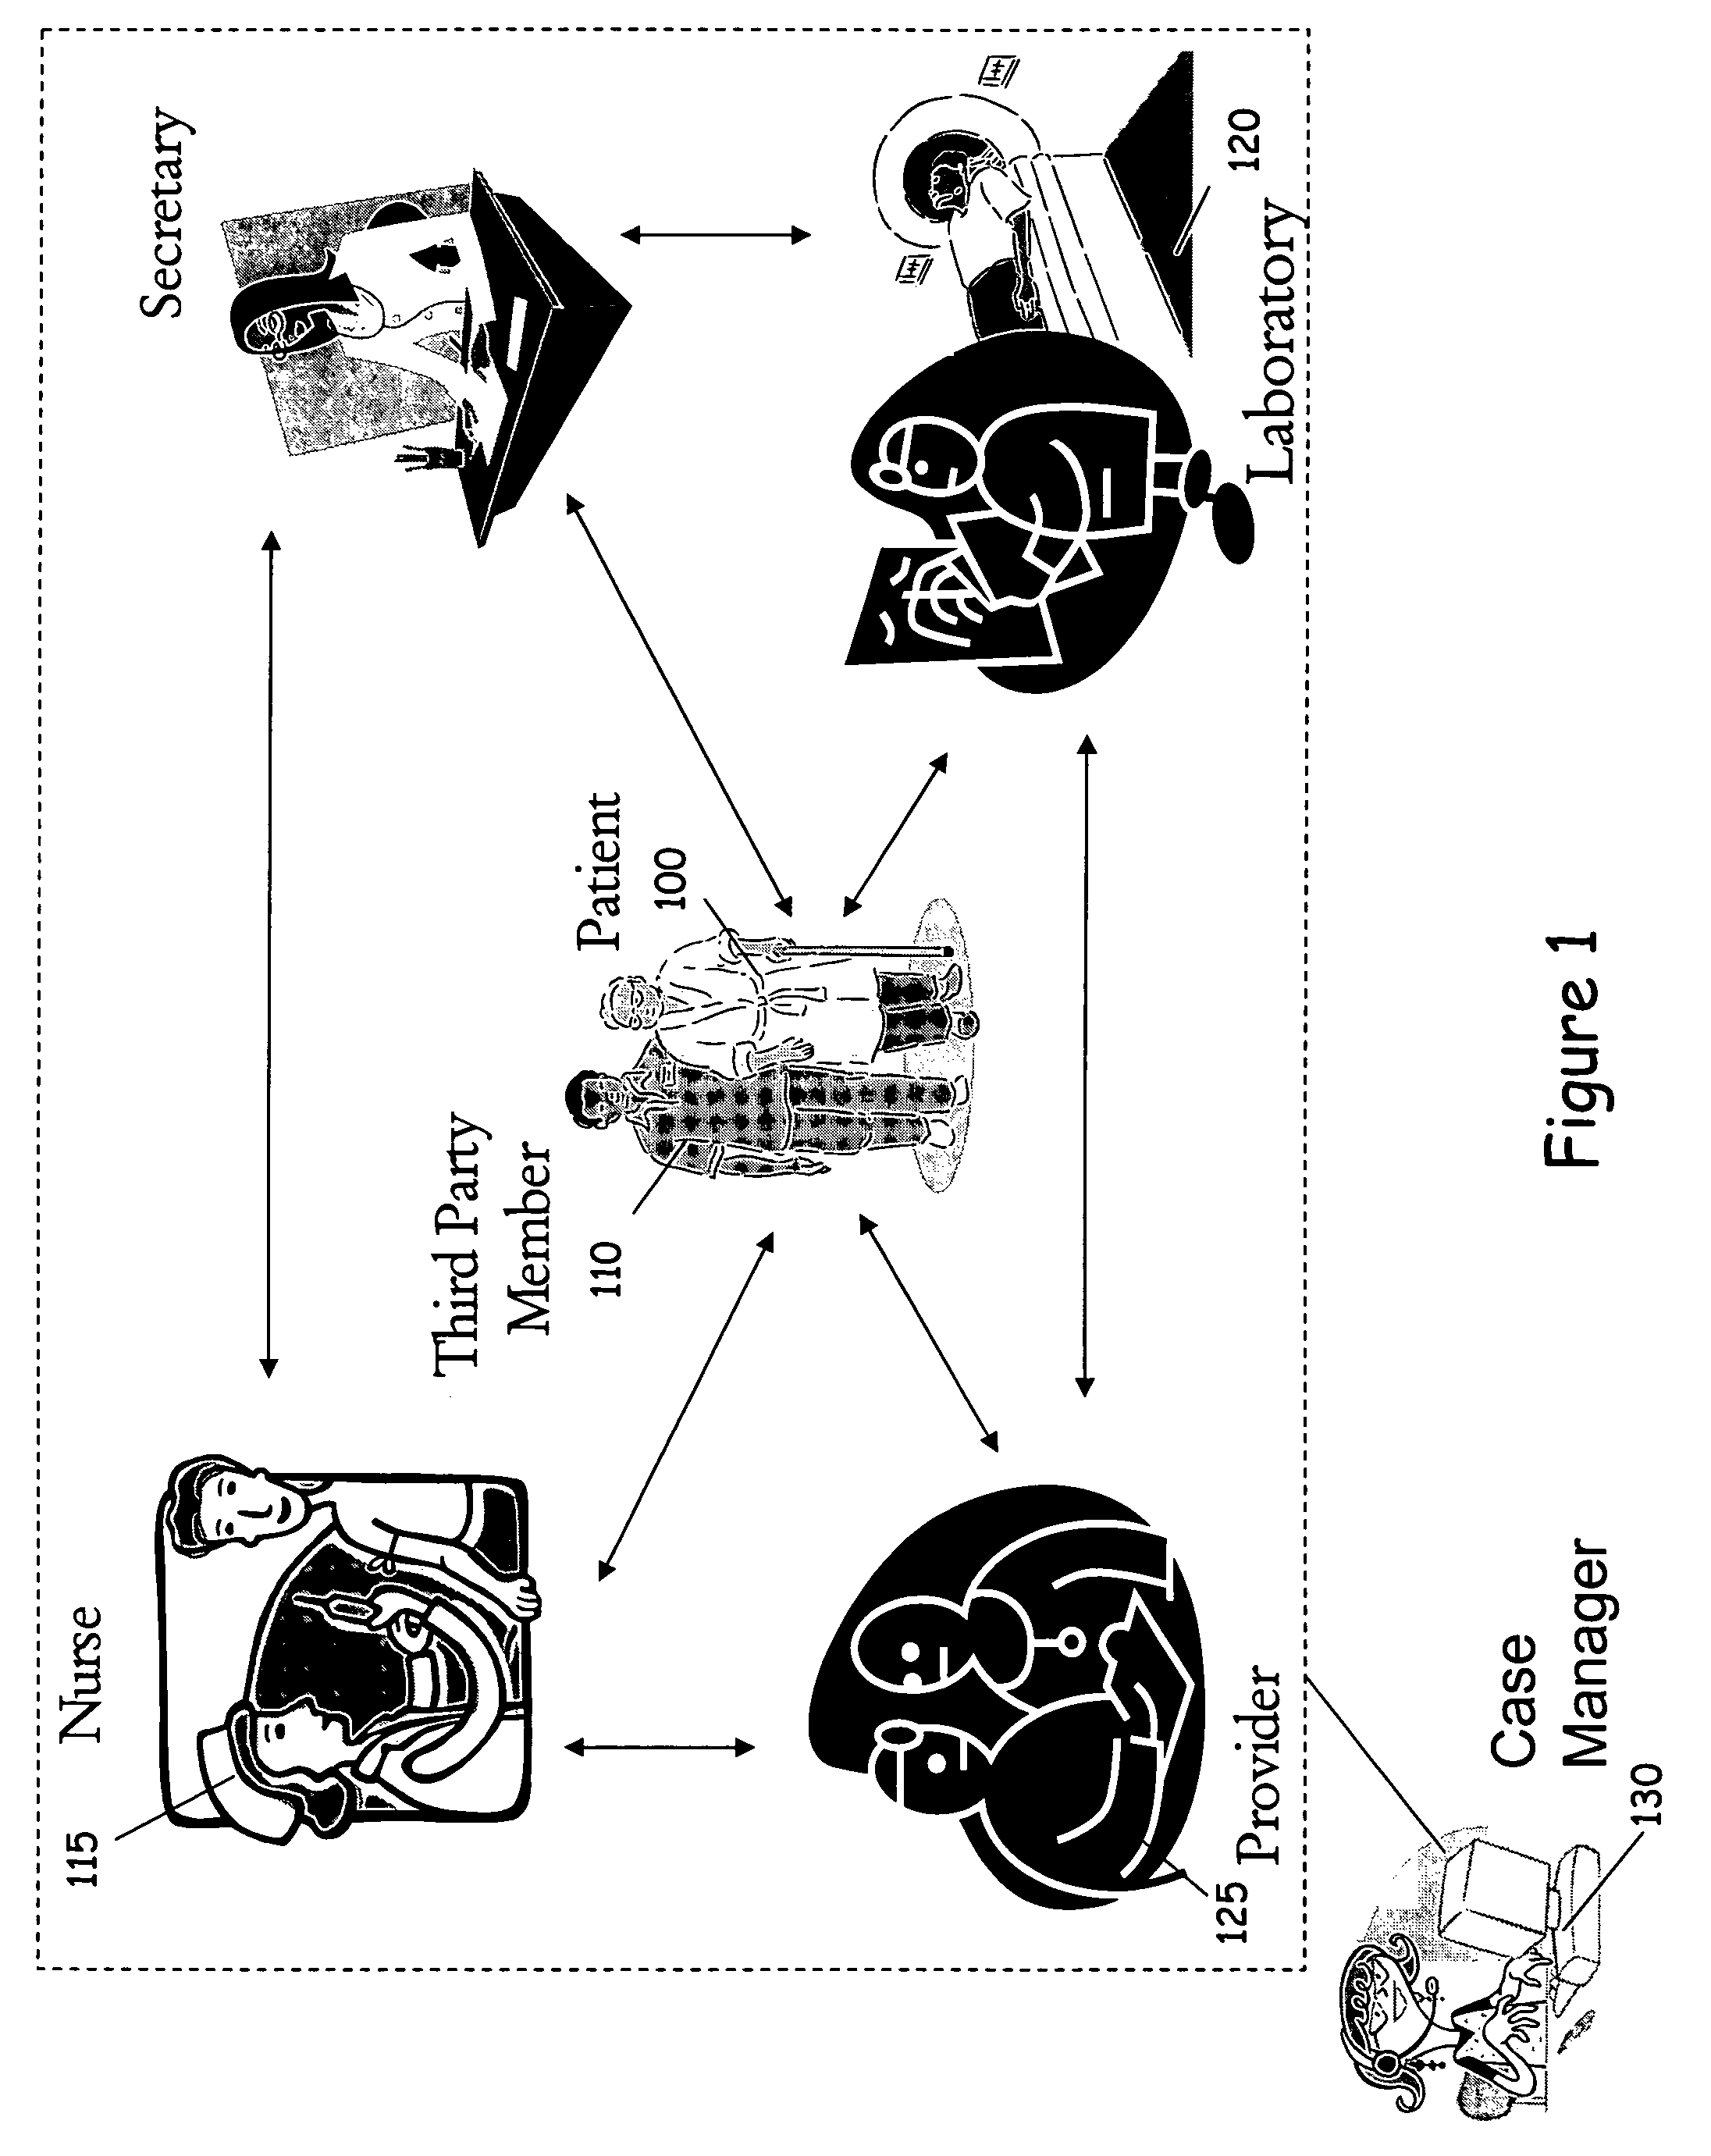 System and method for managing a patient with chronic disease